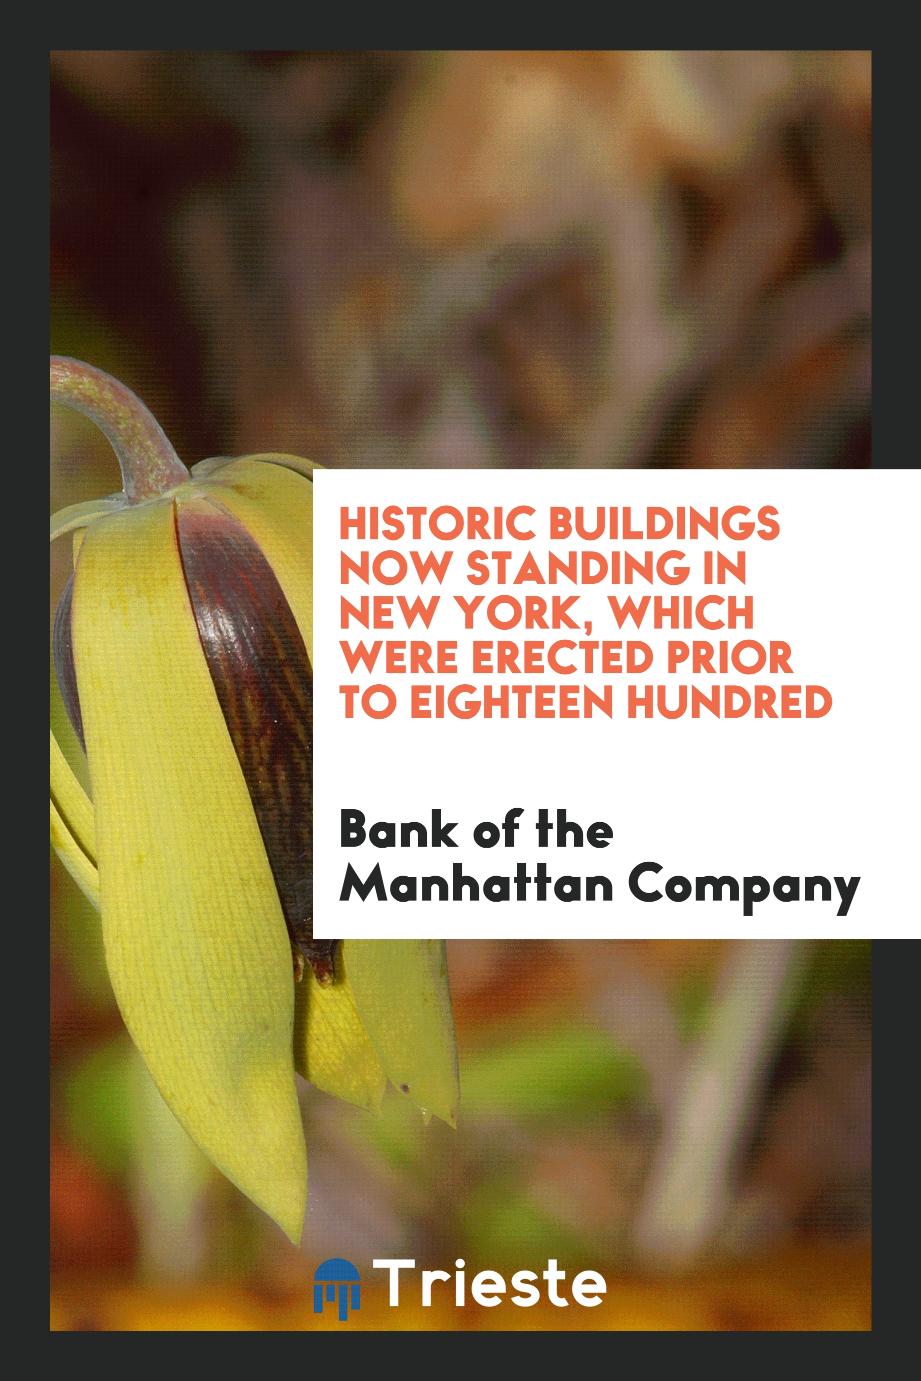 Historic buildings now standing in New York, which were erected prior to eighteen hundred